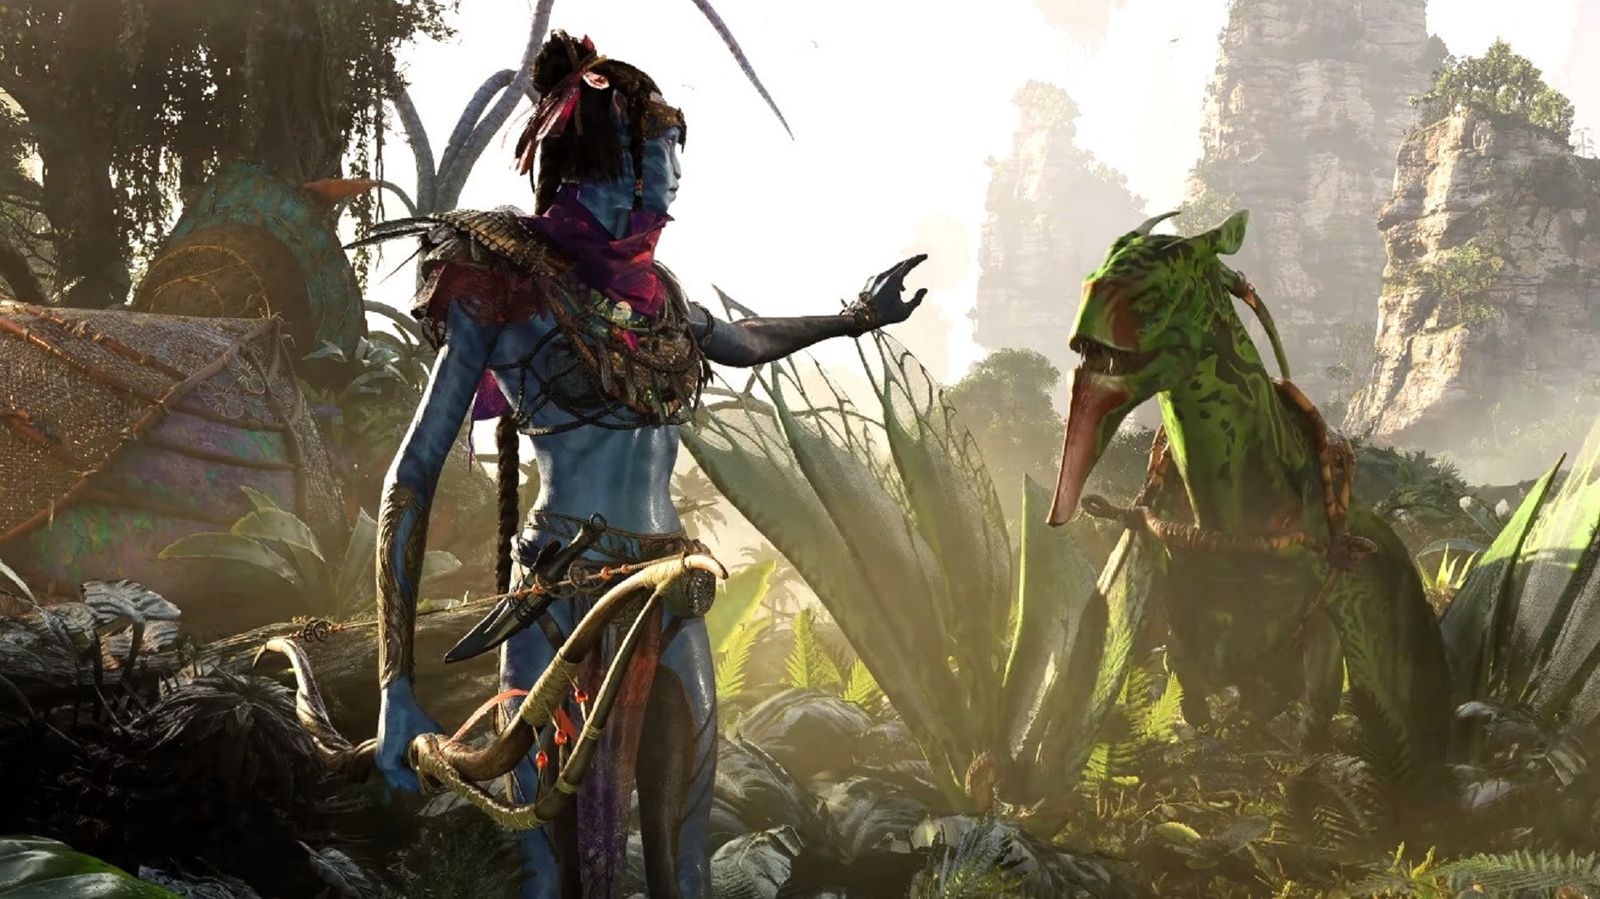 Avatar Frontiers of Pandora - release date, trailer, and platforms Na'vi with dinosaur creature